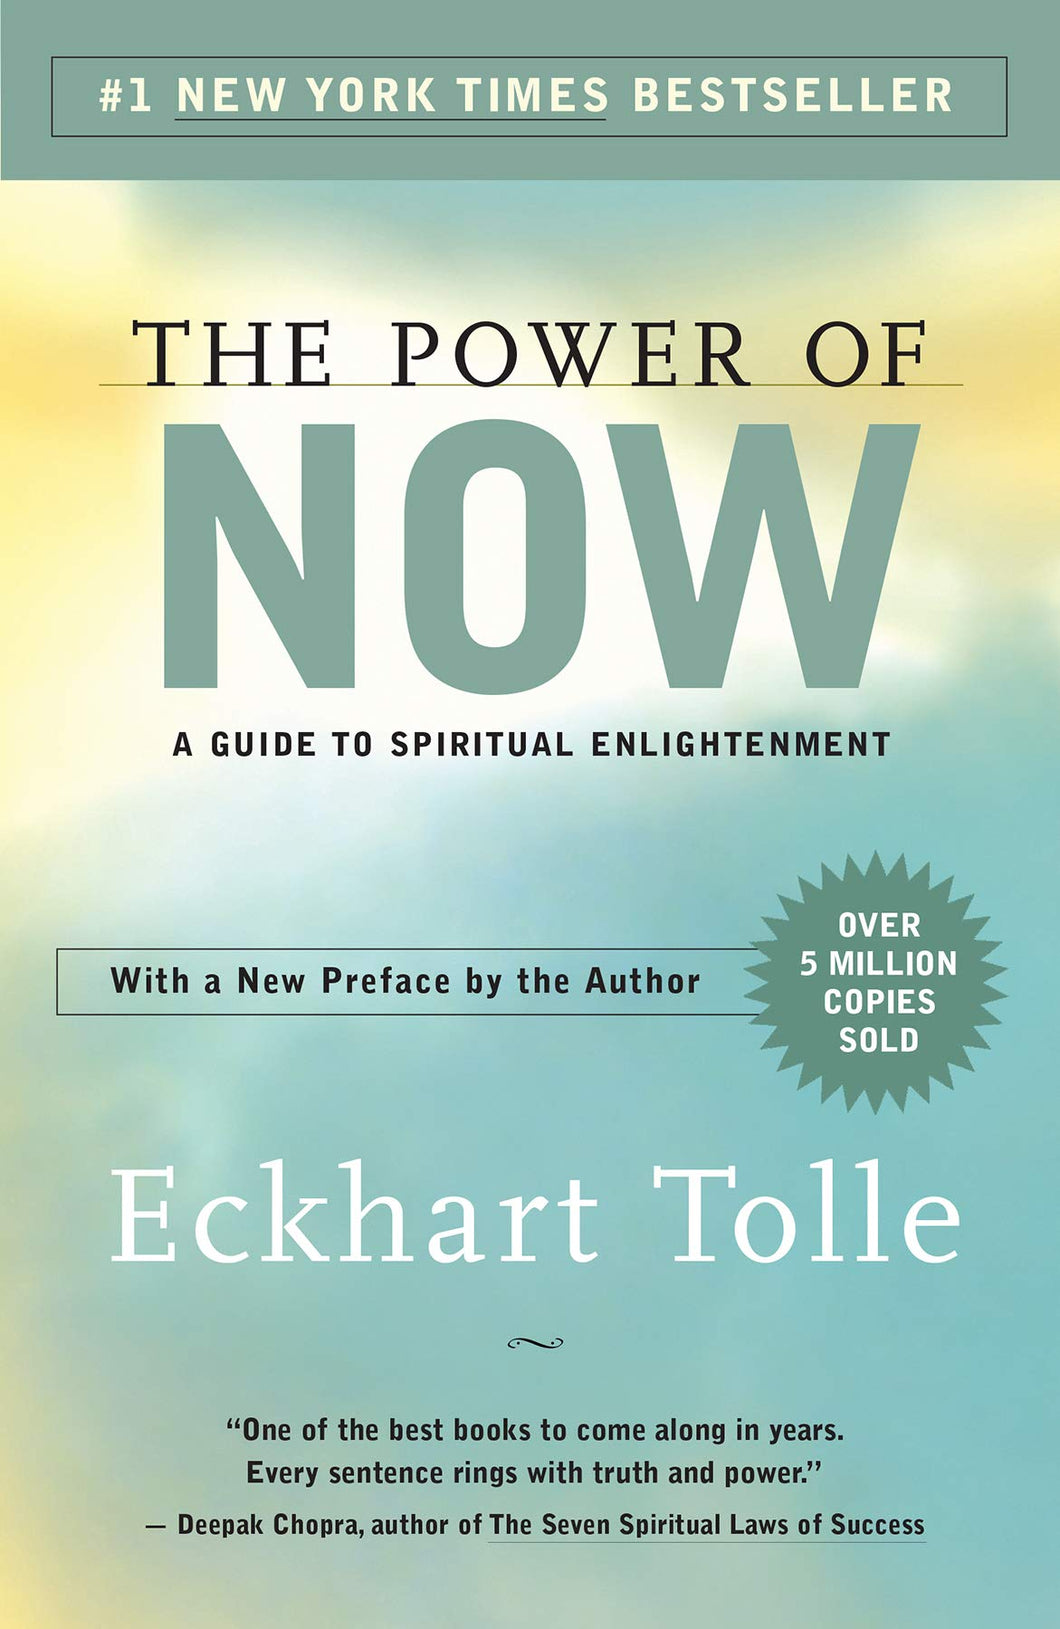 THE POWER OF NOW - Eckhart Tolle